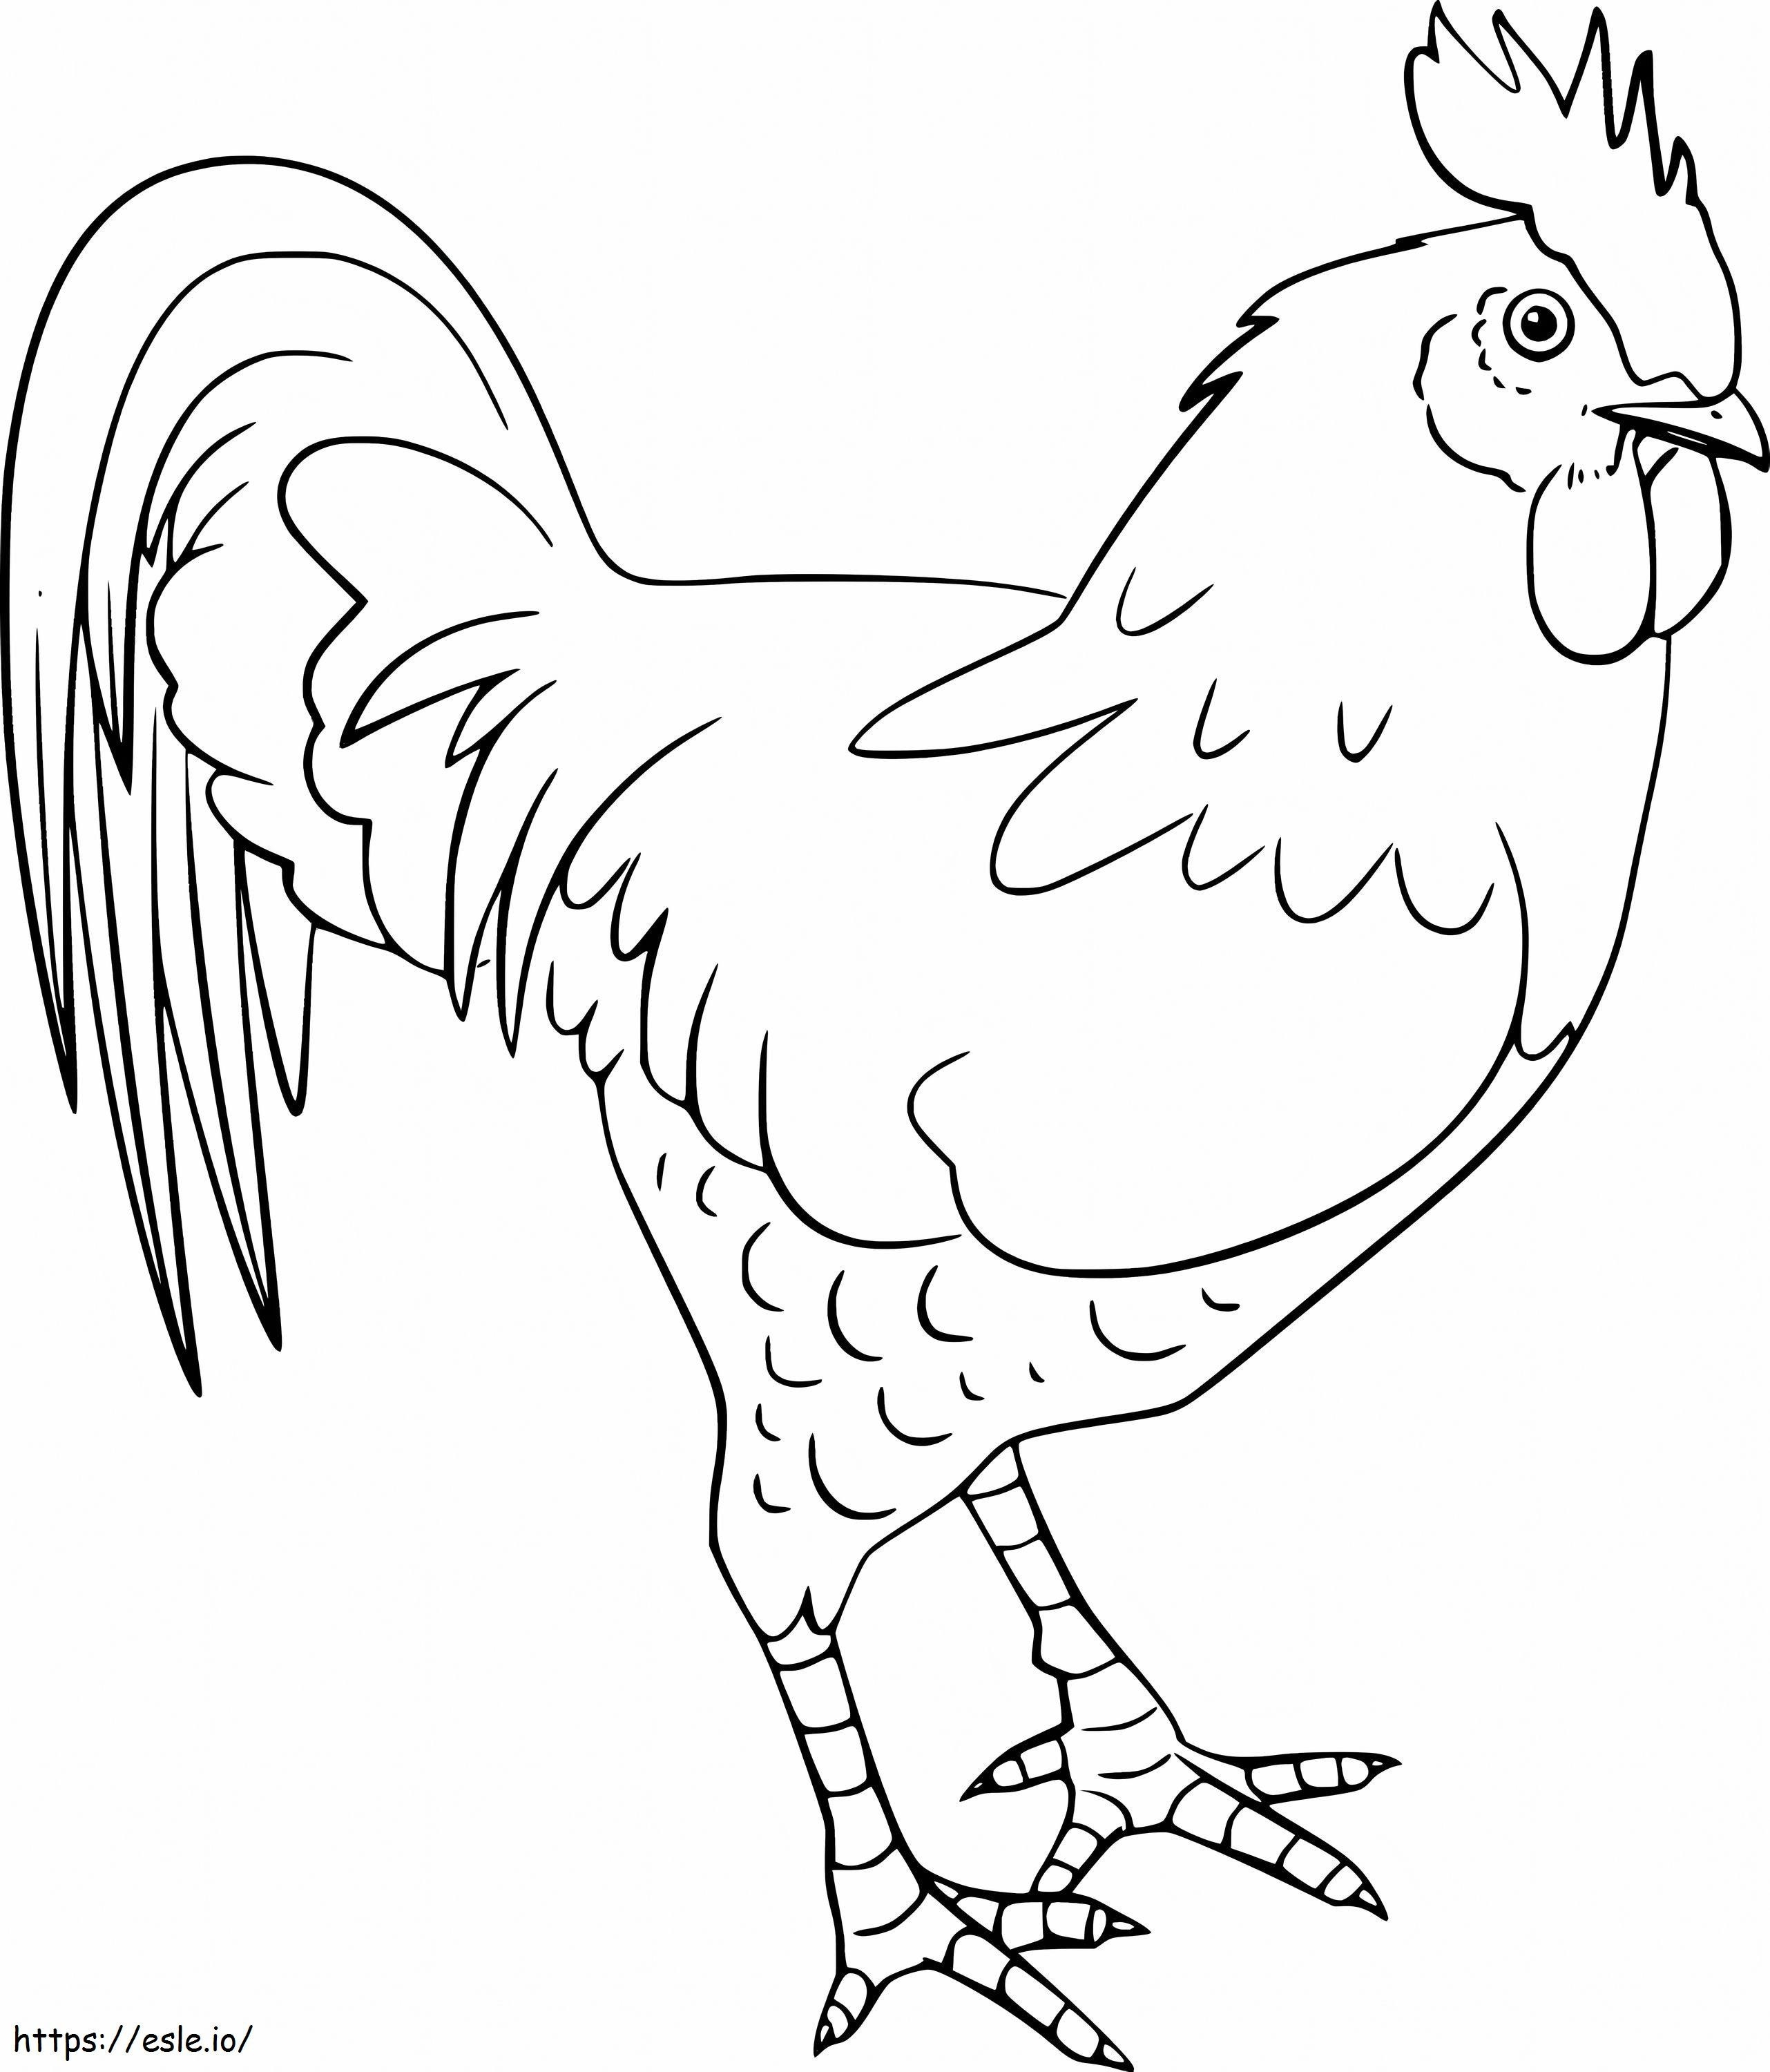 Amazing Rooster coloring page